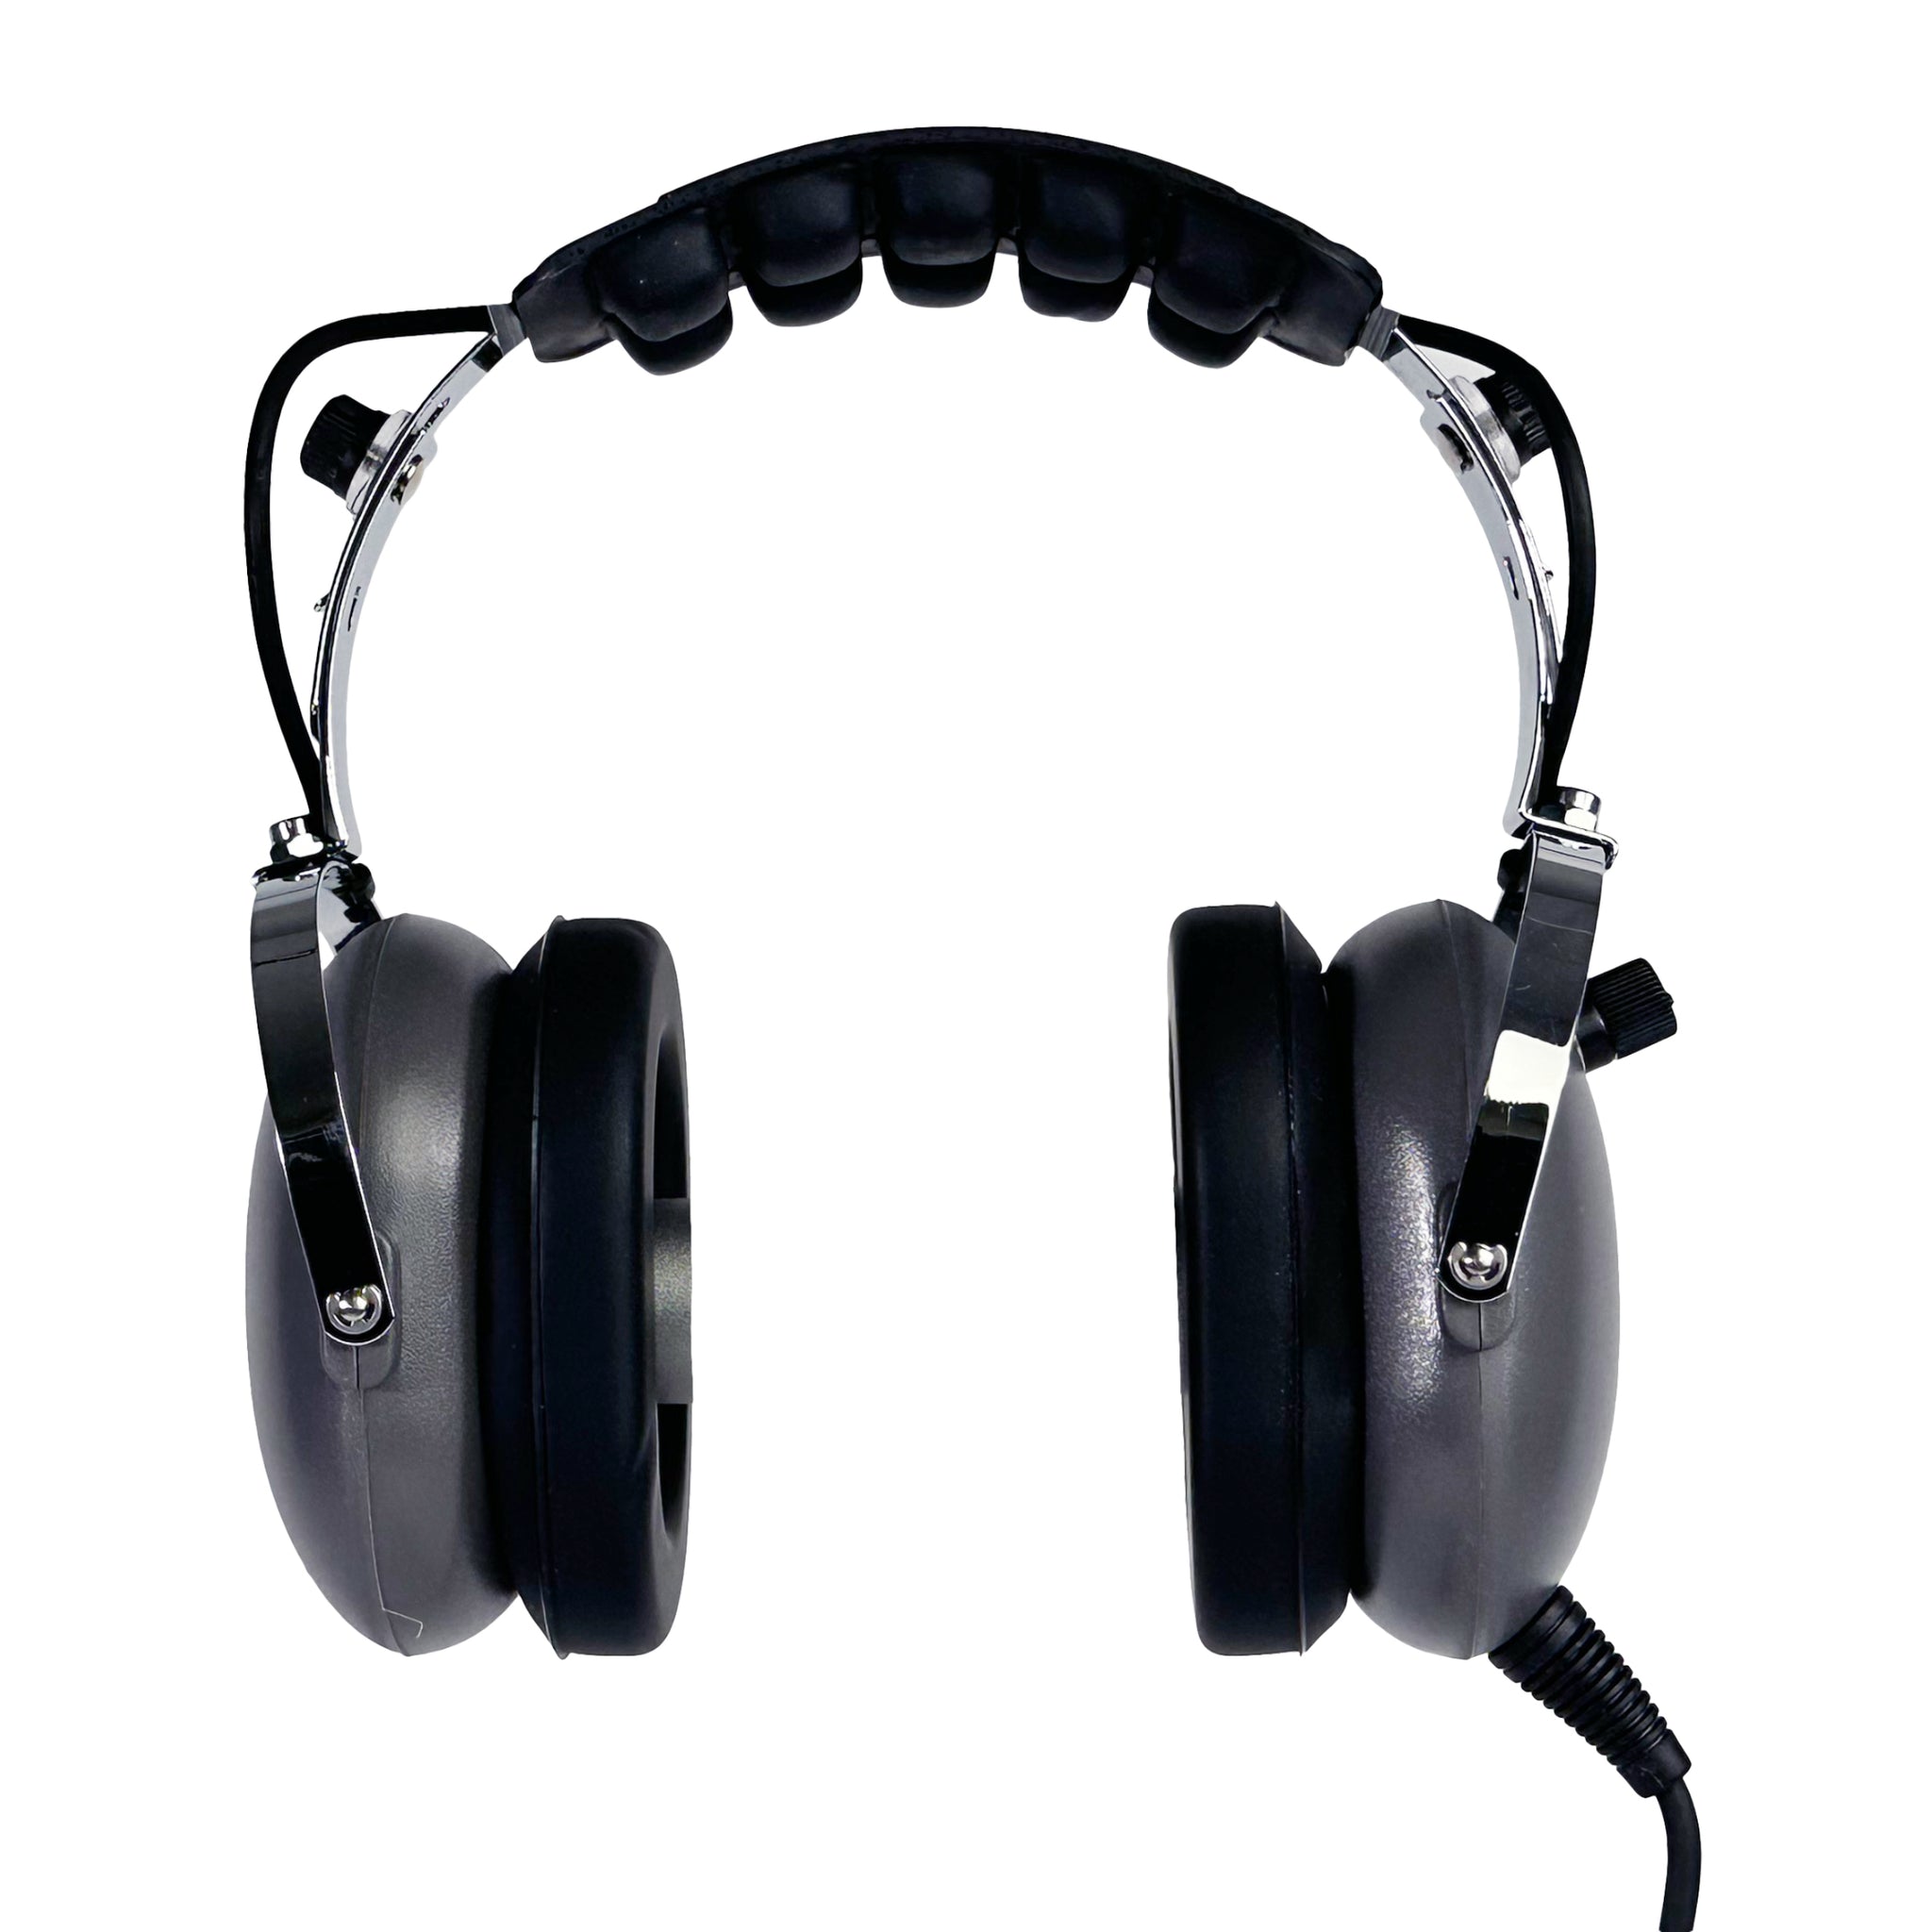 PA11-00H Listen only Helicopter Headset